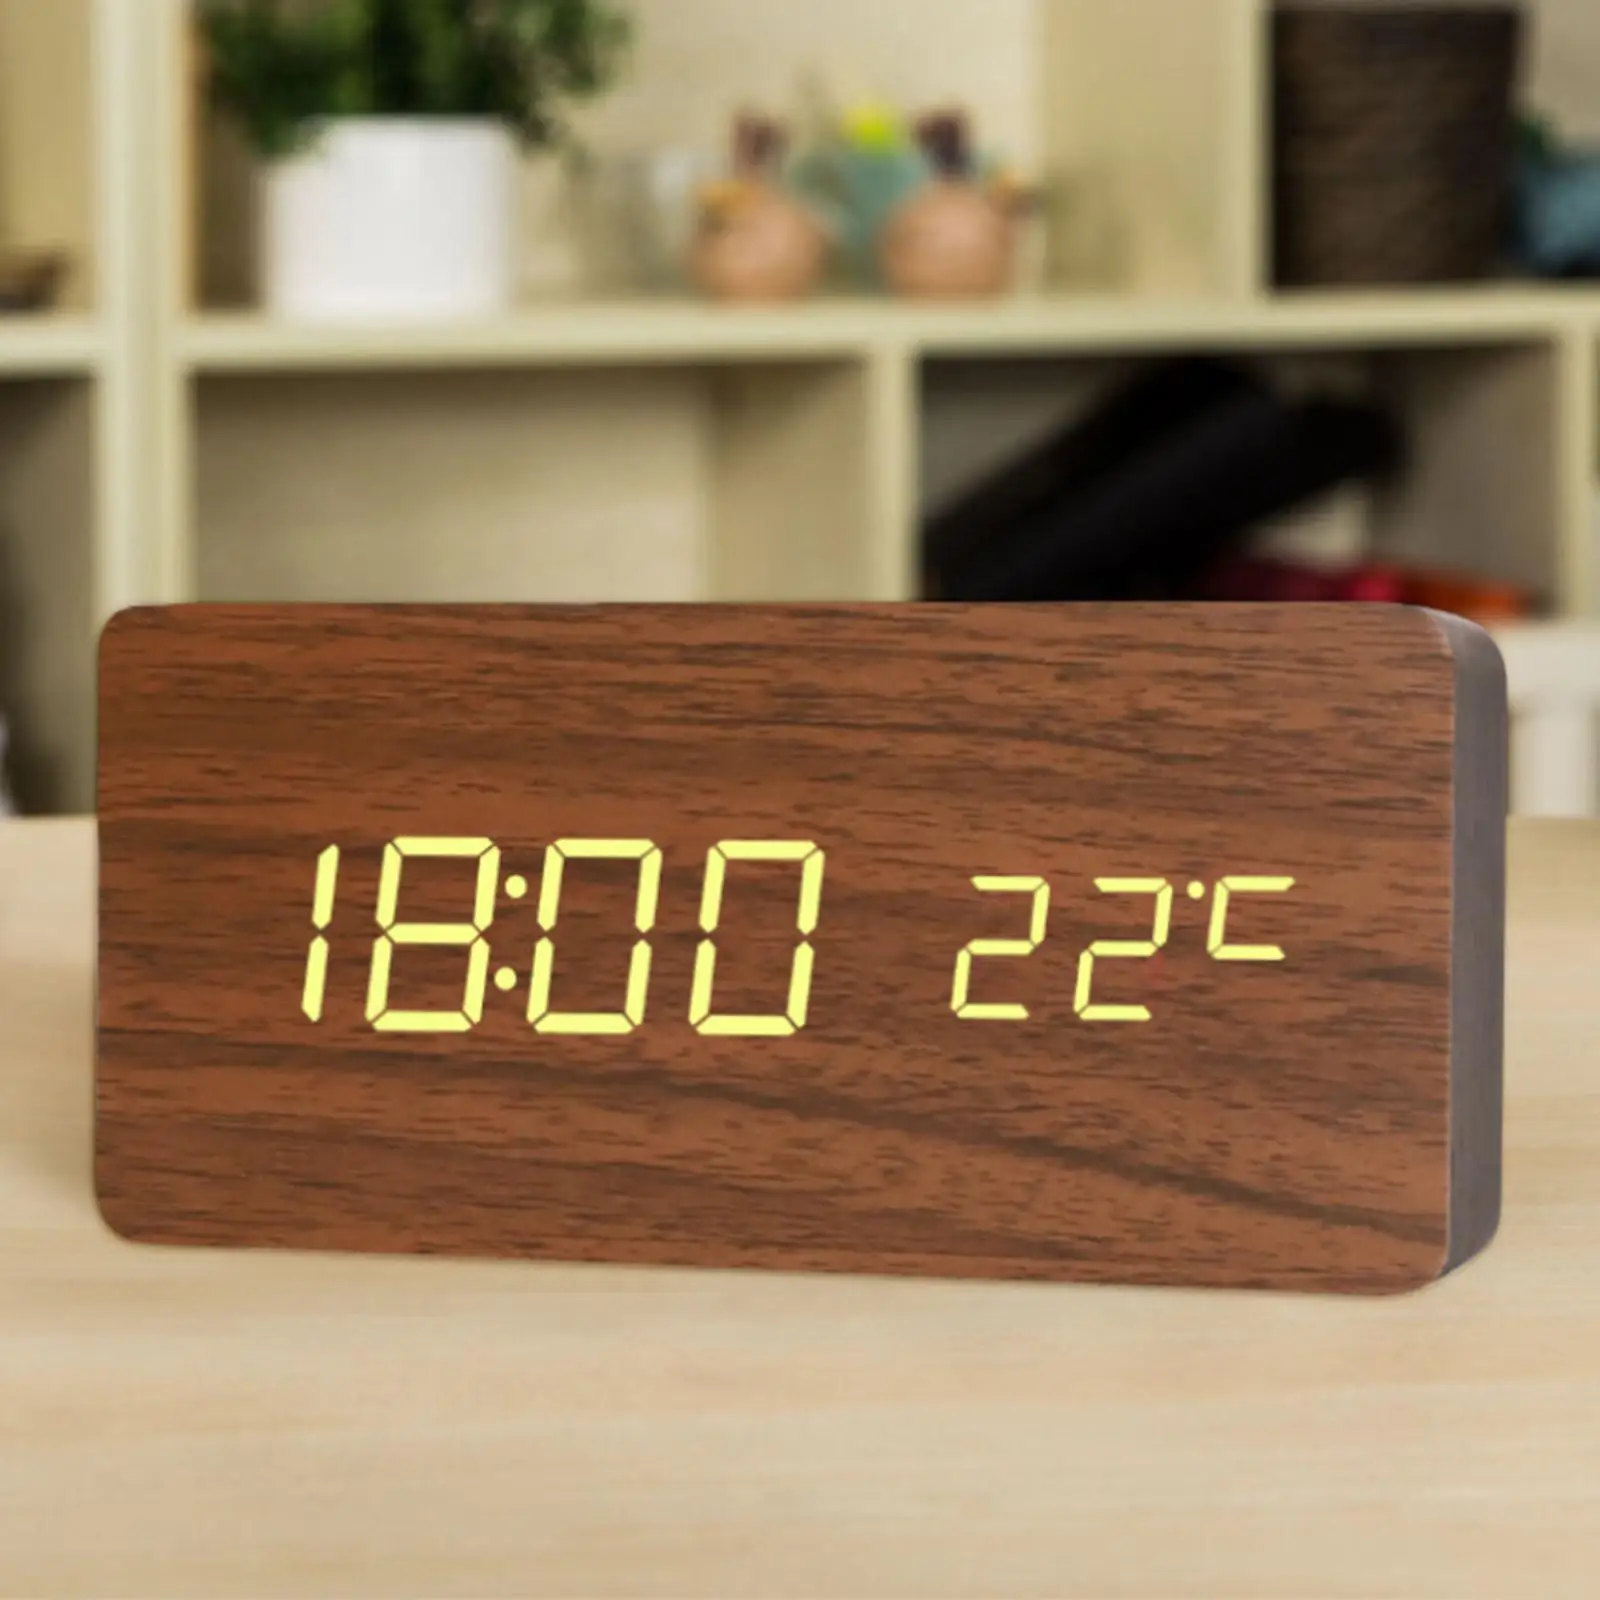 Large Digital Alarm Clock Battery Powered/USB Temperature Date Display Thermometer 3 Alarm Setting Wooden LED for Tabletop Kids